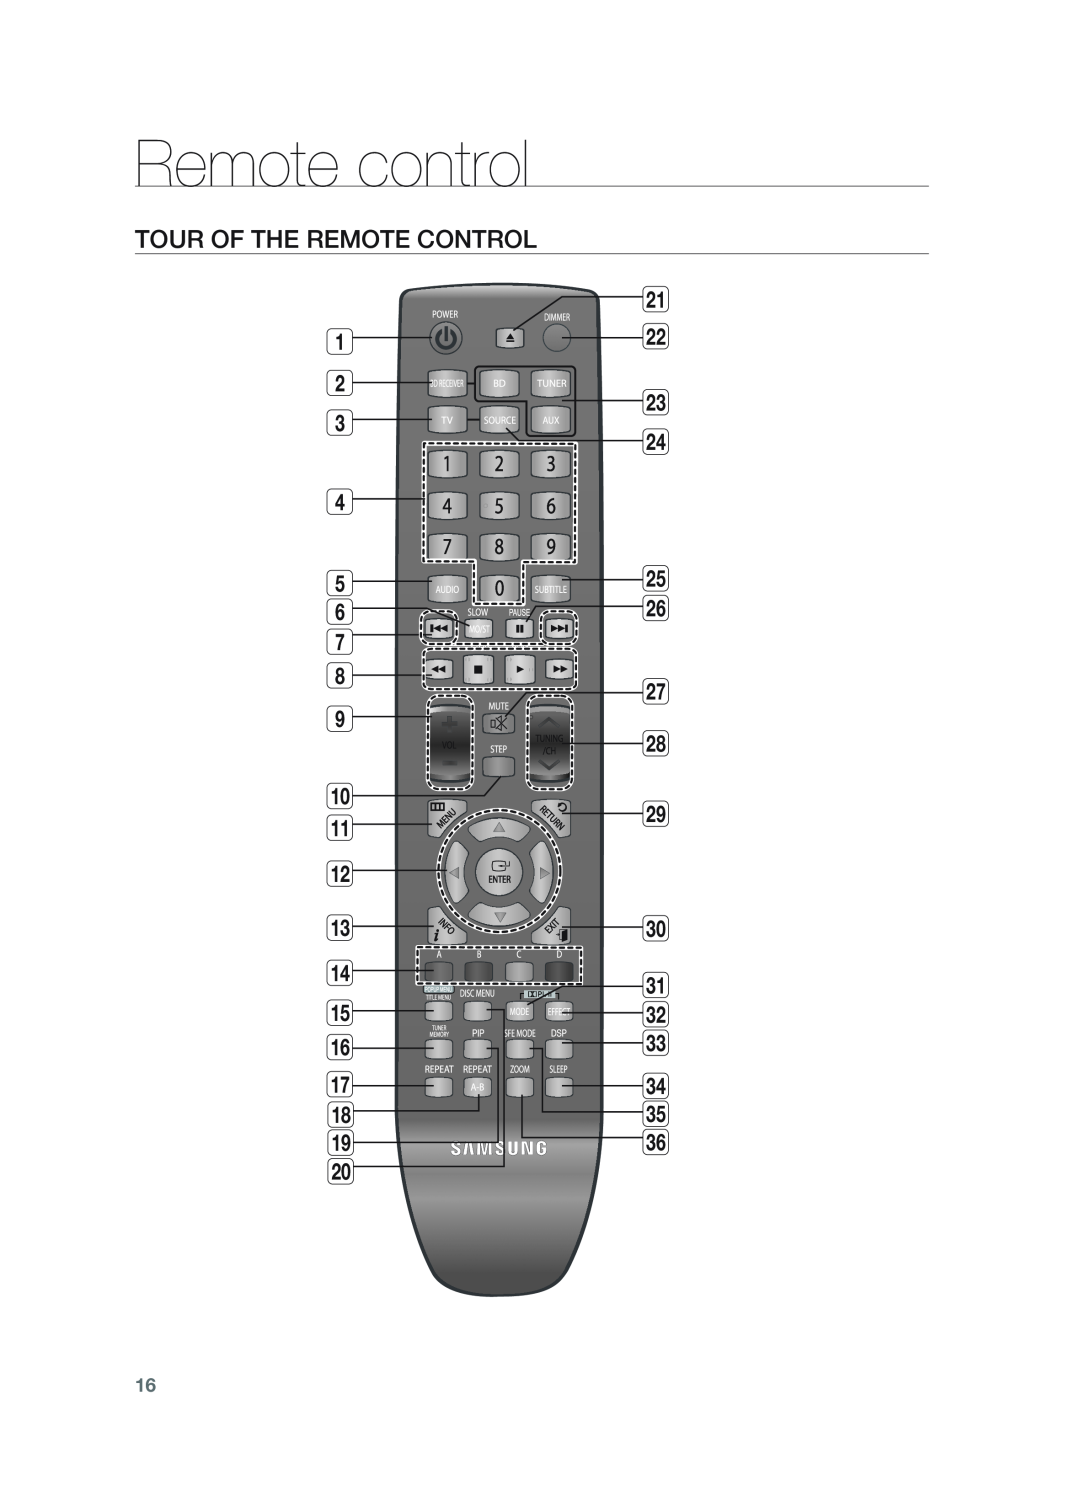 Samsung HT-BD1255, HT-BD1252 Remote control, Tour Of The Remote Control, 1 2 3 4 5 6 7 8 9 10 11 12 13 14 15 16 17 18 19 